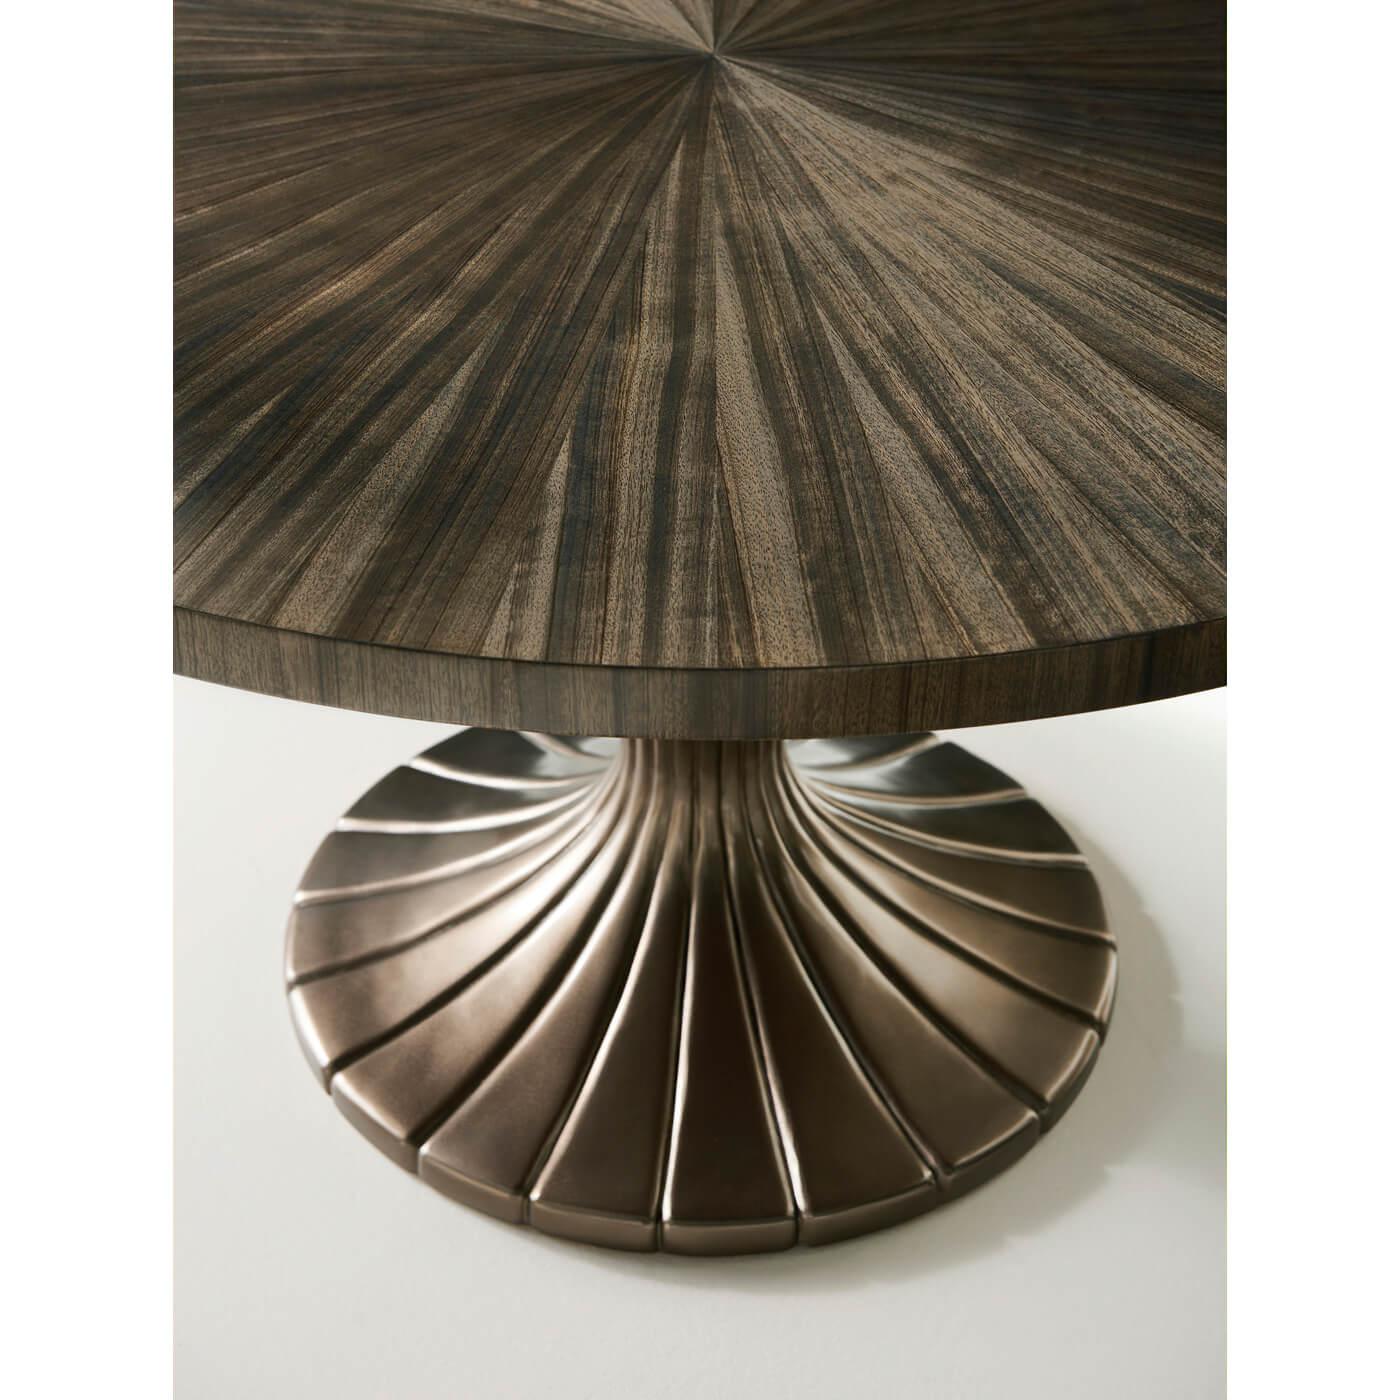 An Art Deco-inspired round dining table with a composite fluted vasiform base in a bronzed finish. This beautiful table has a radial-matched, soft Sepia-finished Paldoa tabletop. This table pairs well with contemporary or more traditional chairs and